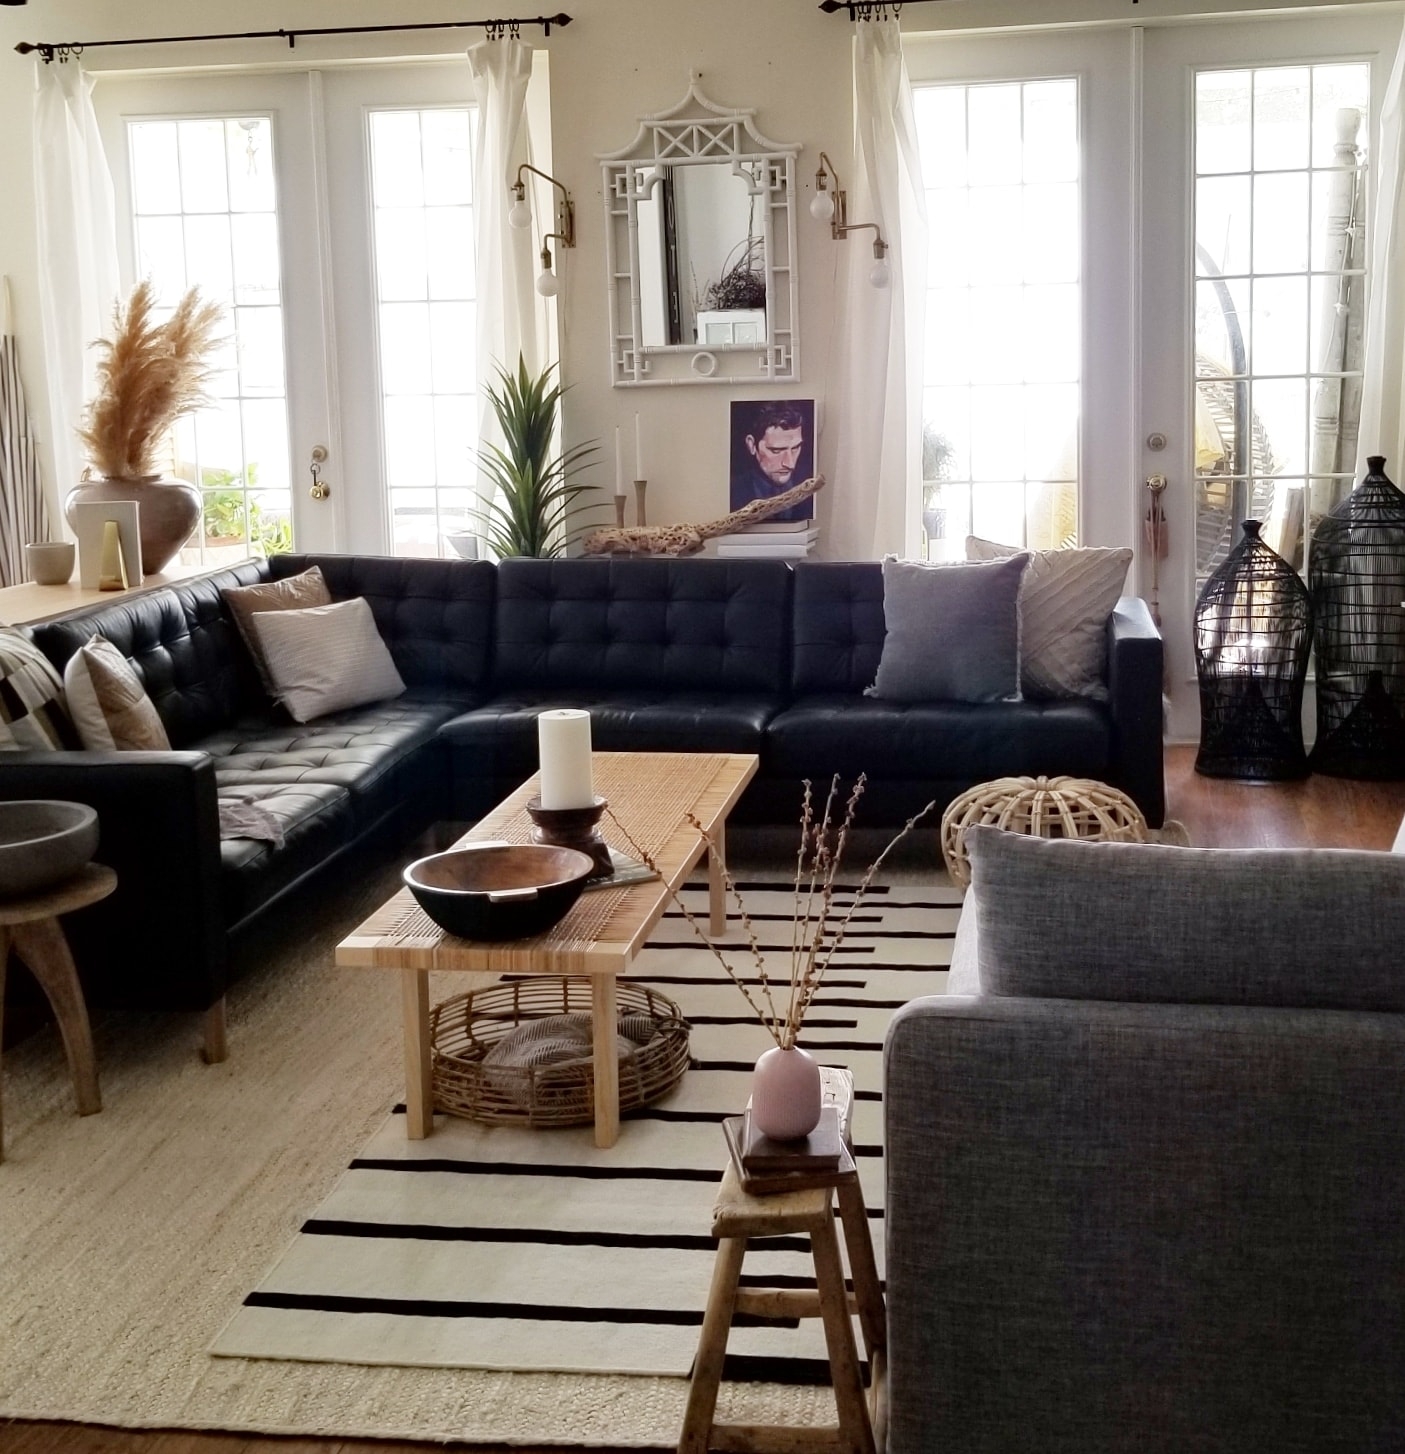 Cozy and Modern Living Room Design - Bees 'N Burlap